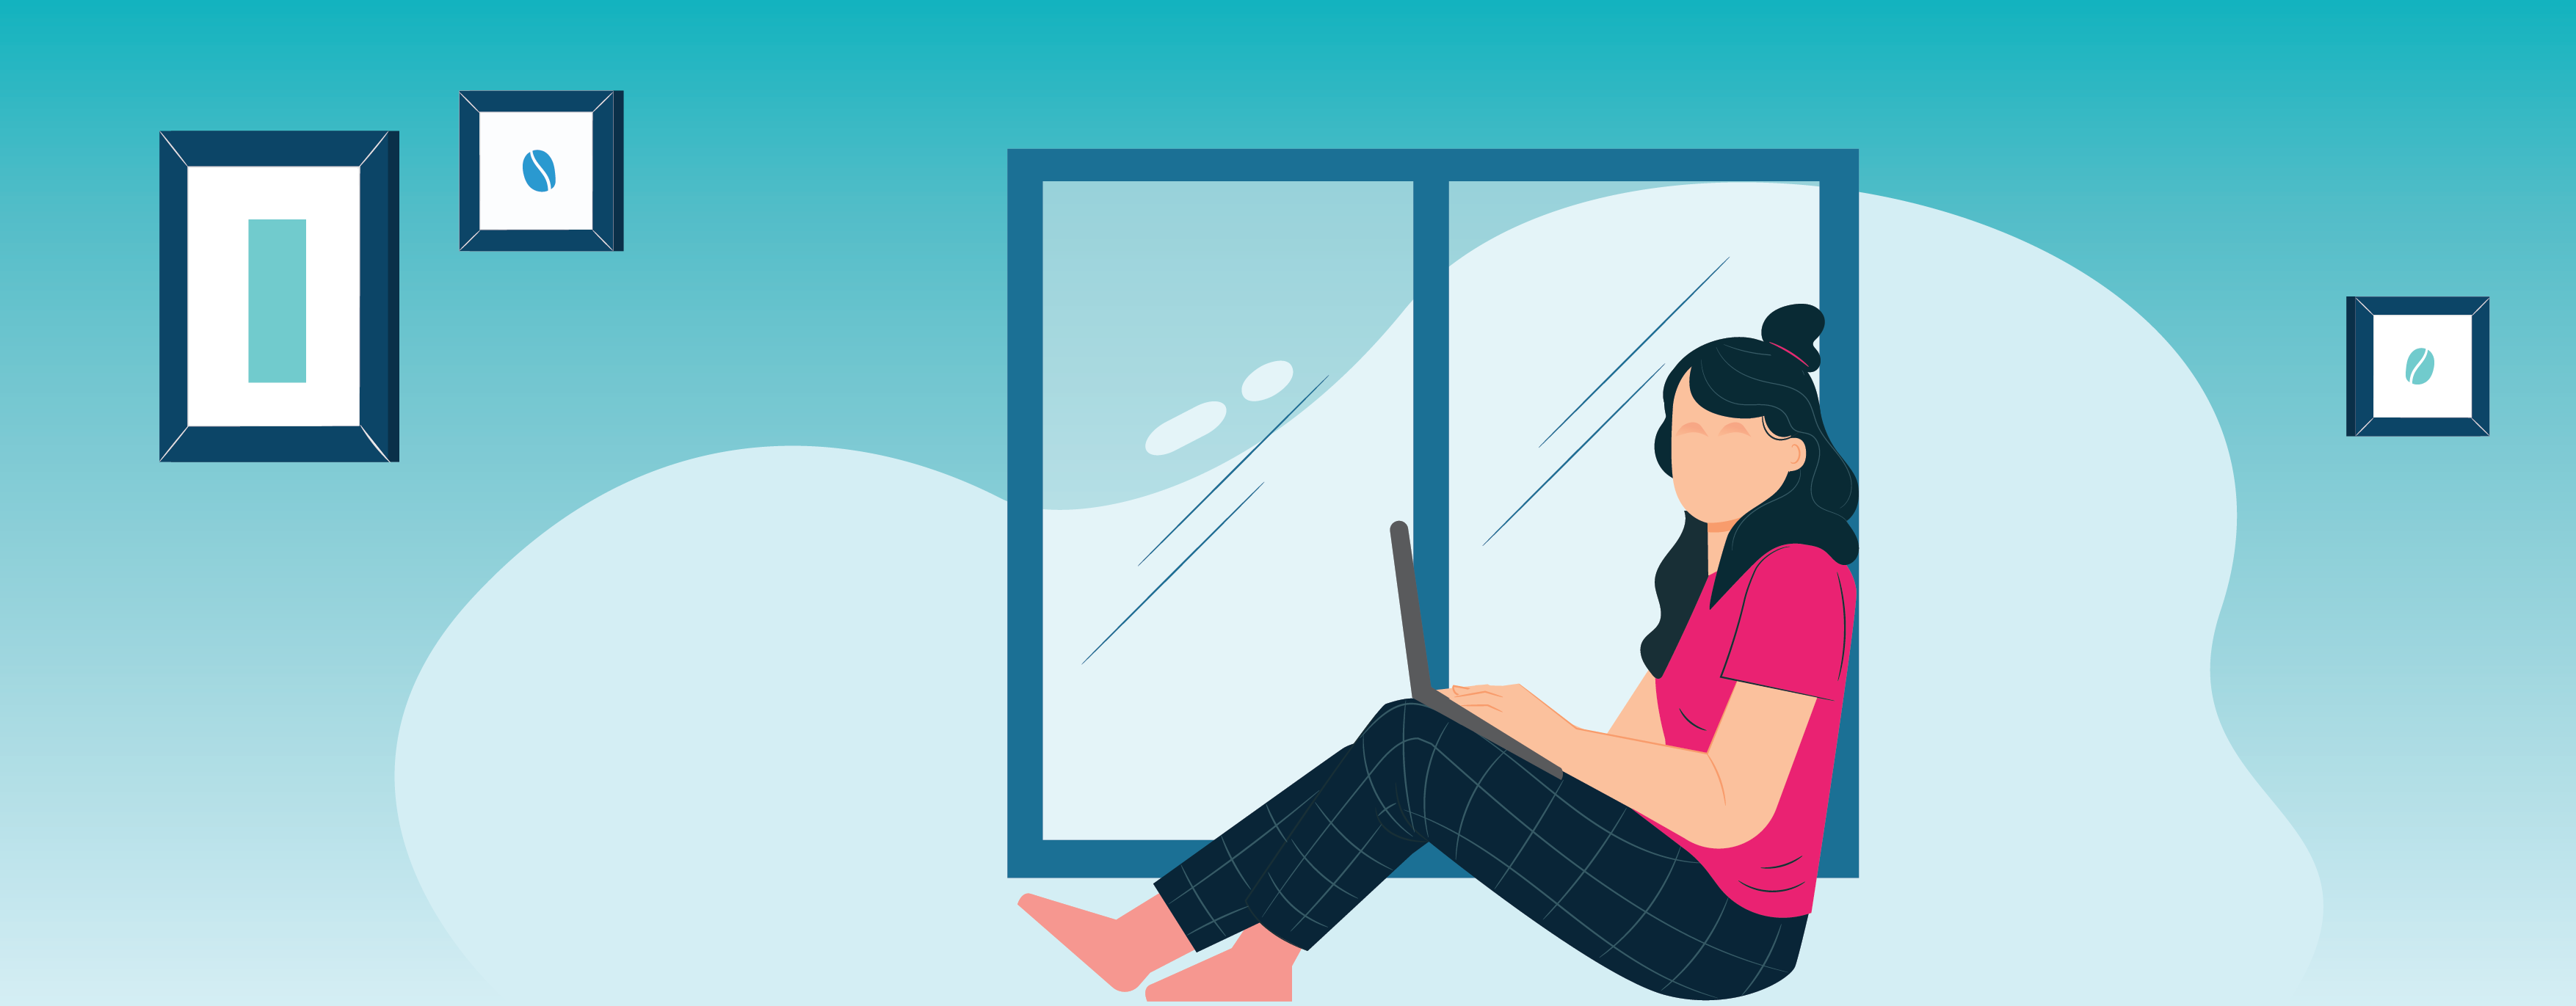 Managing remote employees